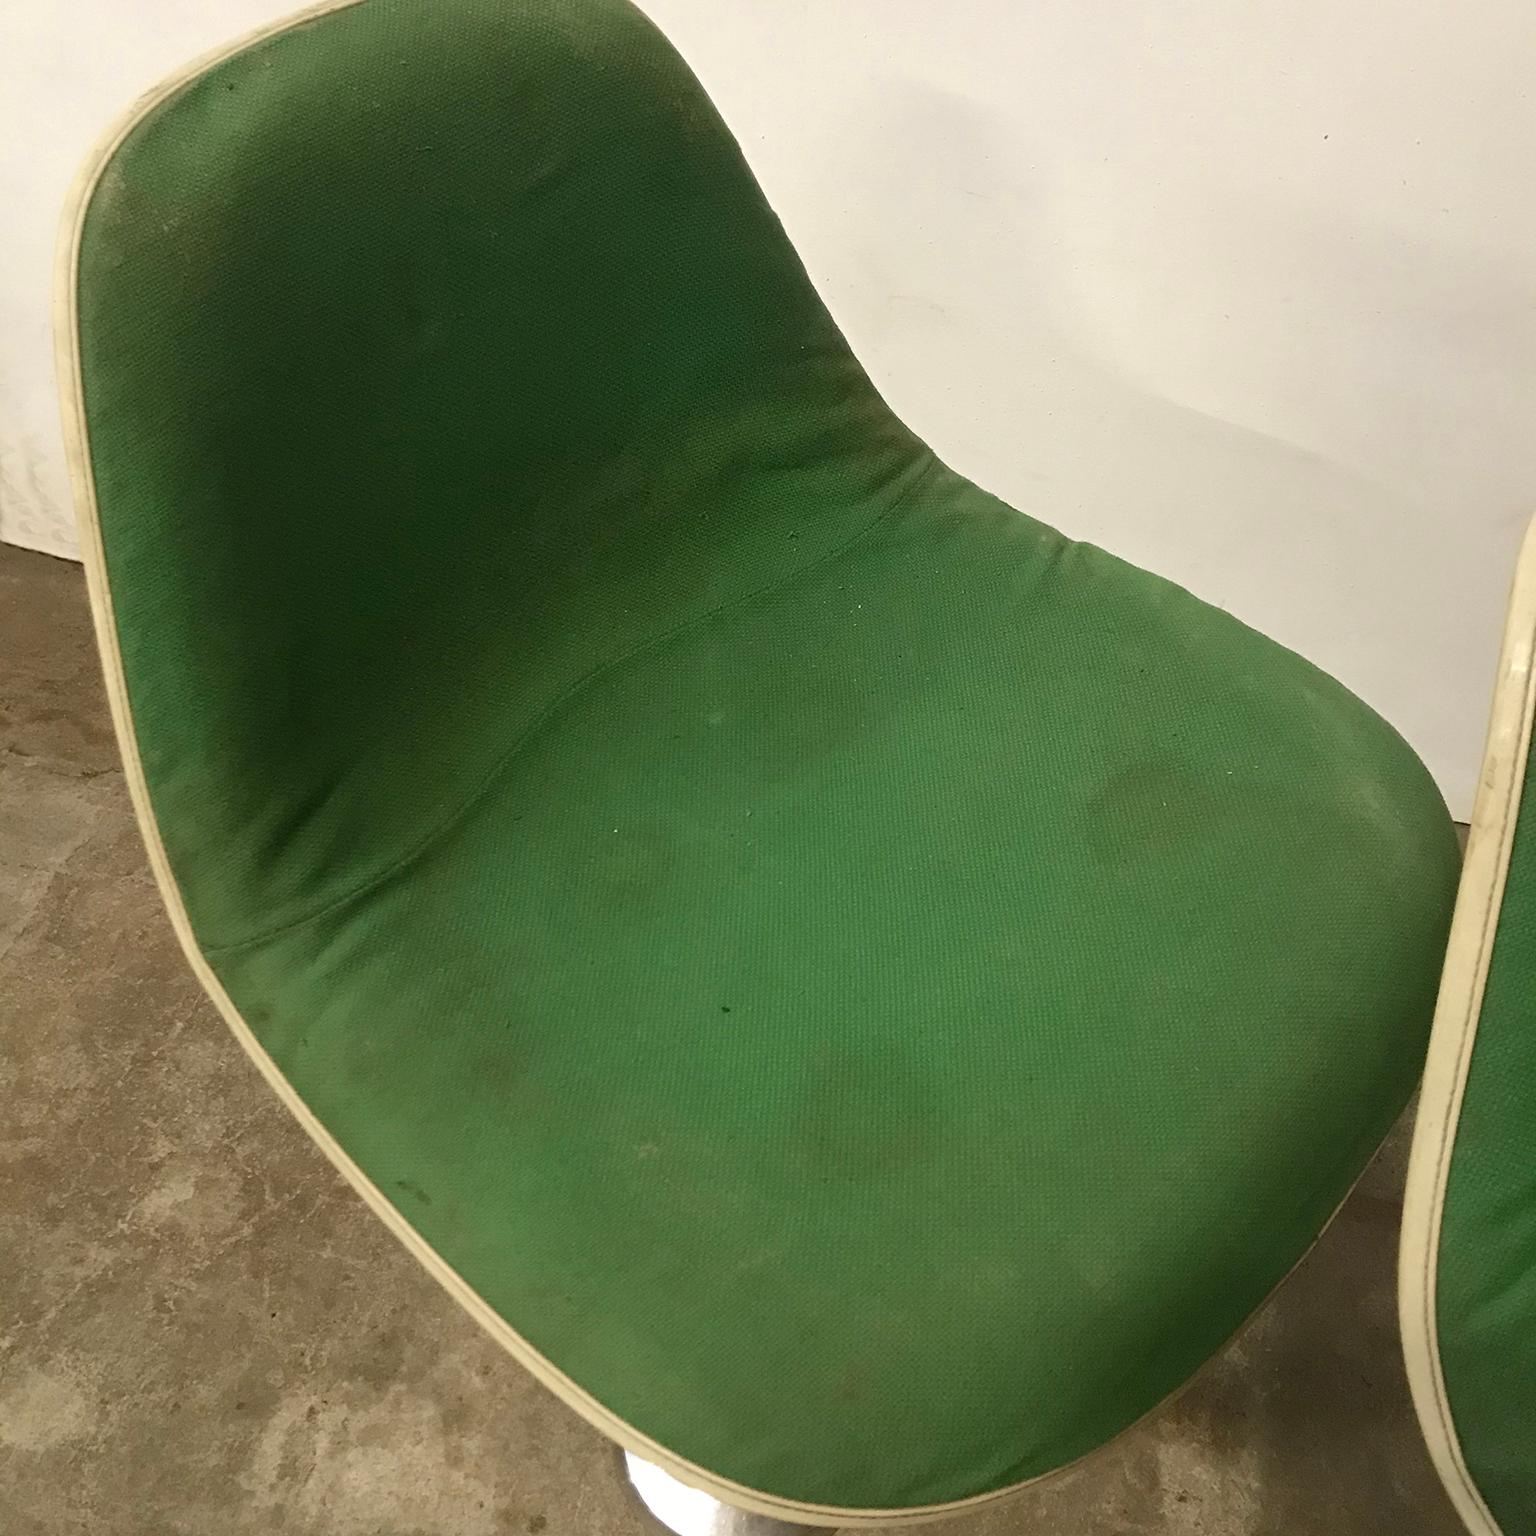 1969 Eames Herman Miller/Fehlbaum Extremely Rare White Barstools in Green Fabric For Sale 4